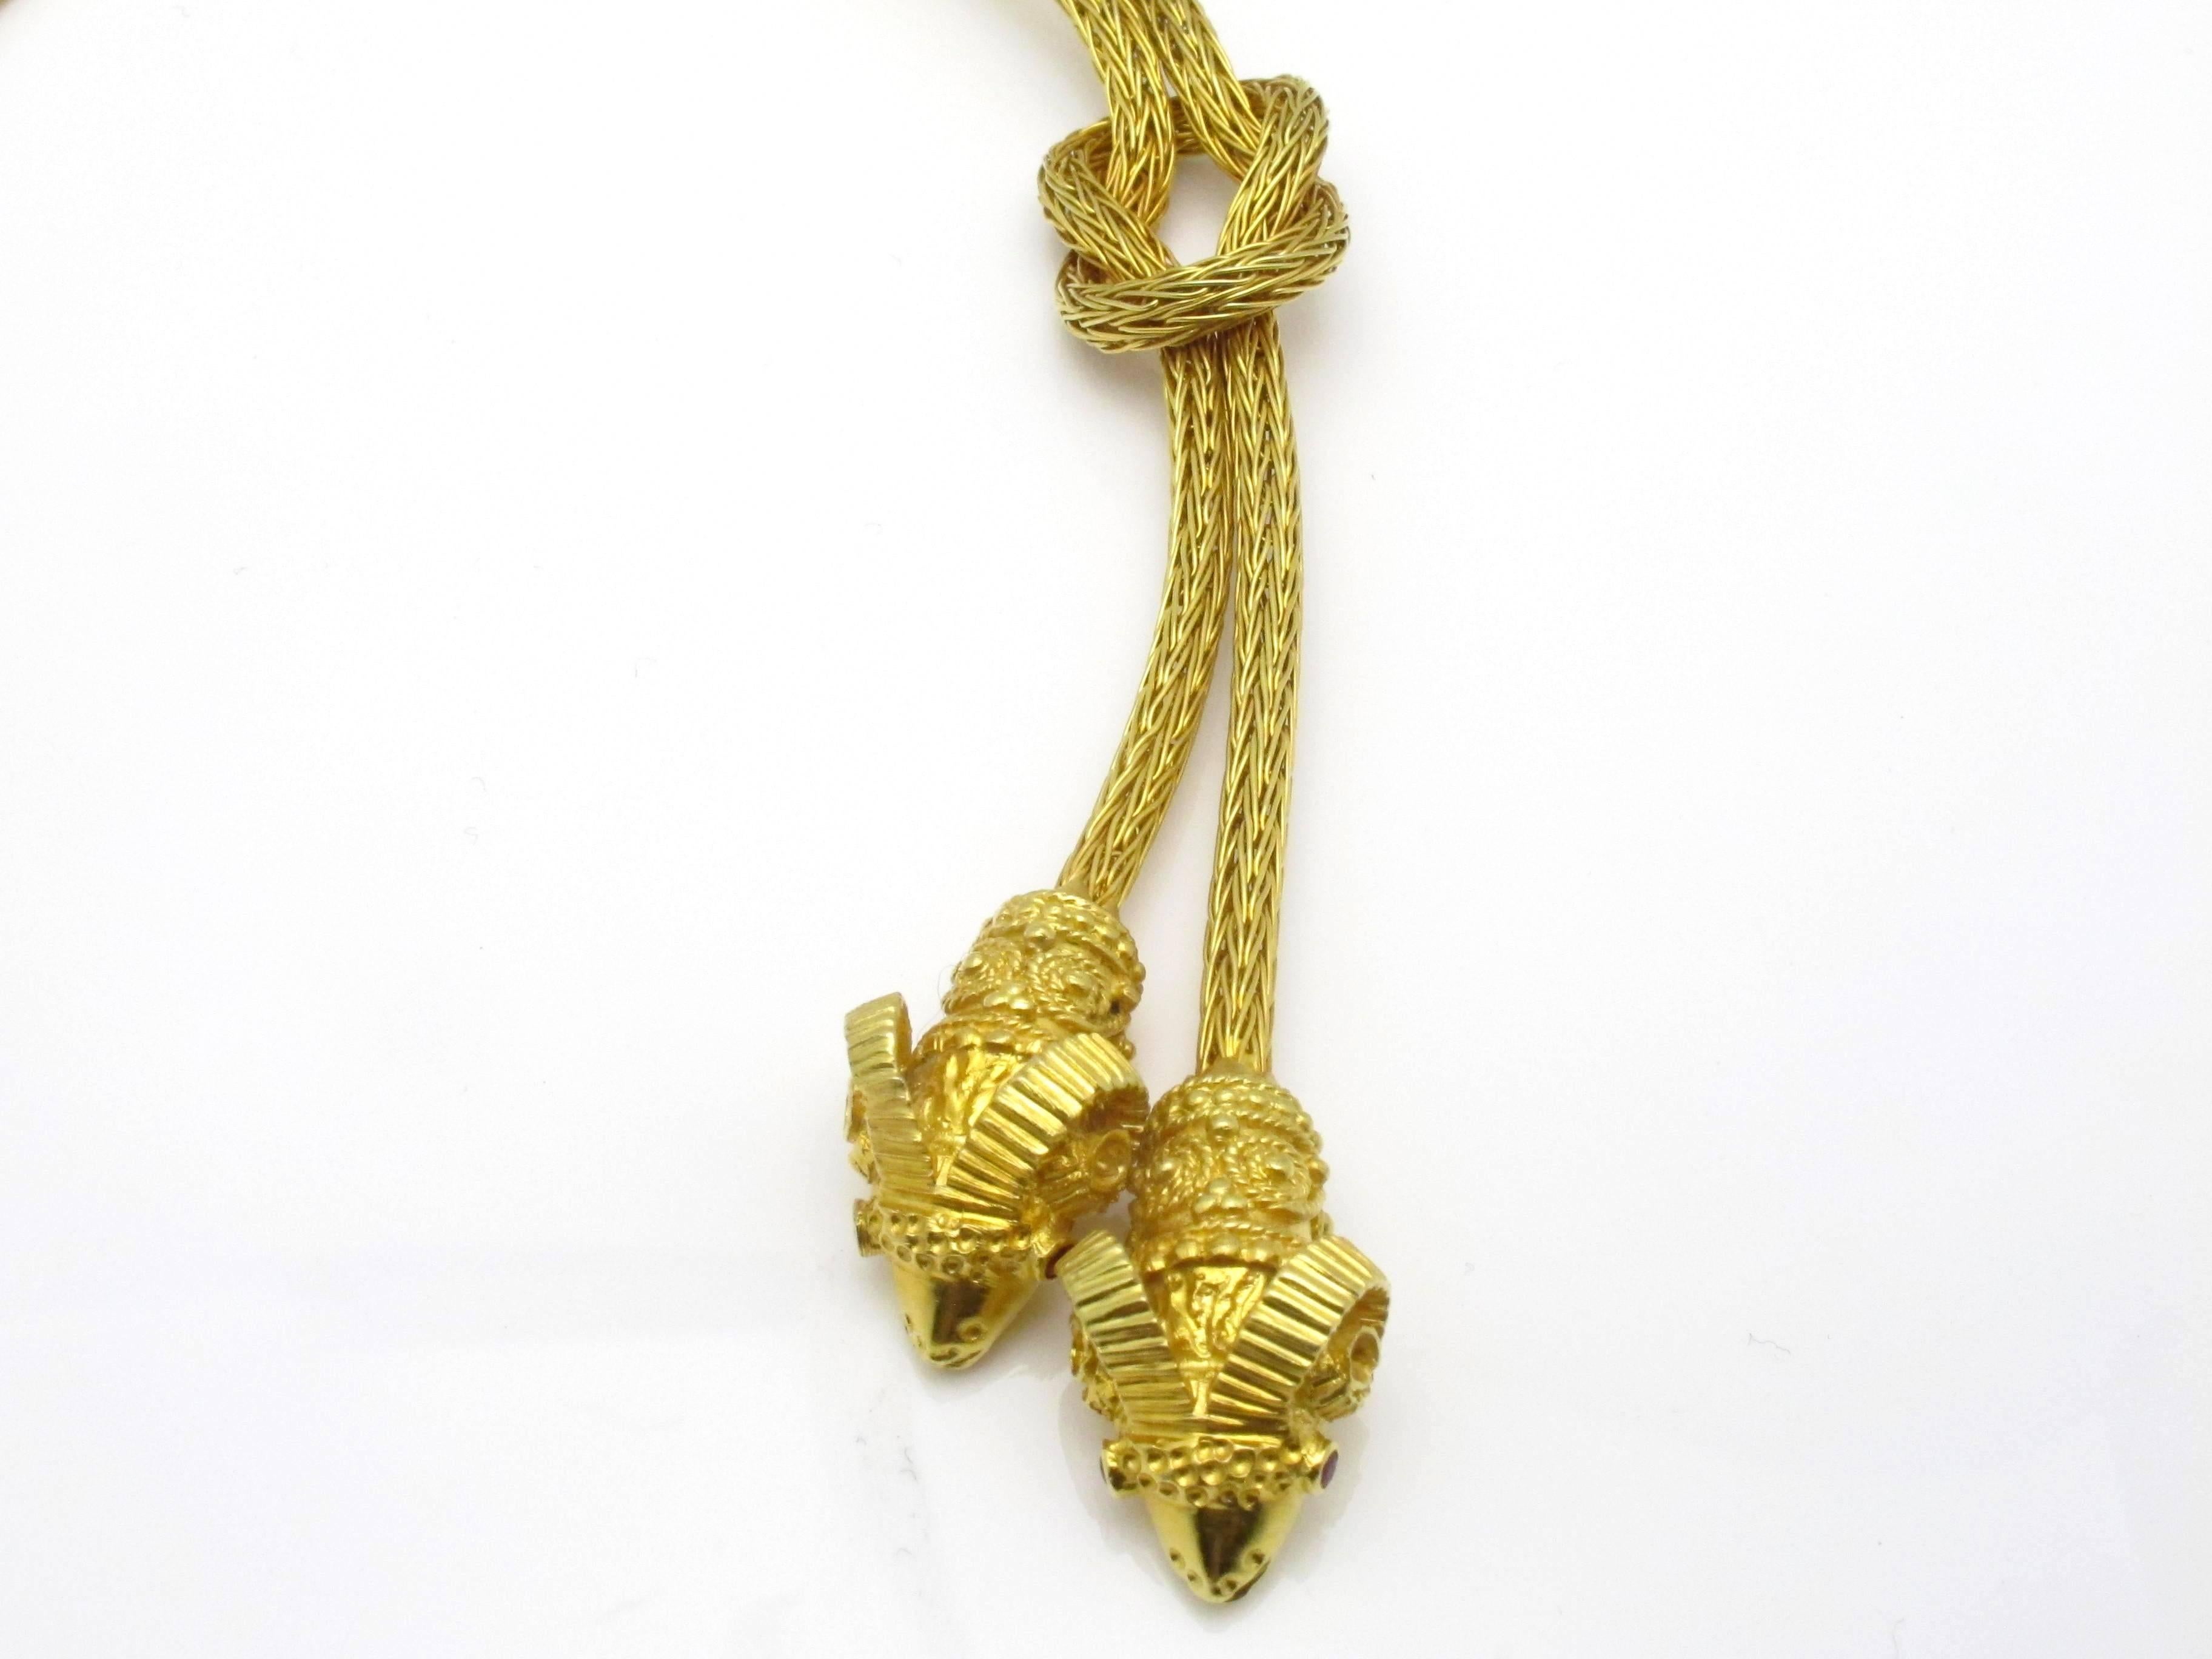 Beautiful Ilias Lalaounis woven gold necklace featuring two rams head drops set with ruby eyes suspended from a herculean knot.  
Length from knot to head: 3.25